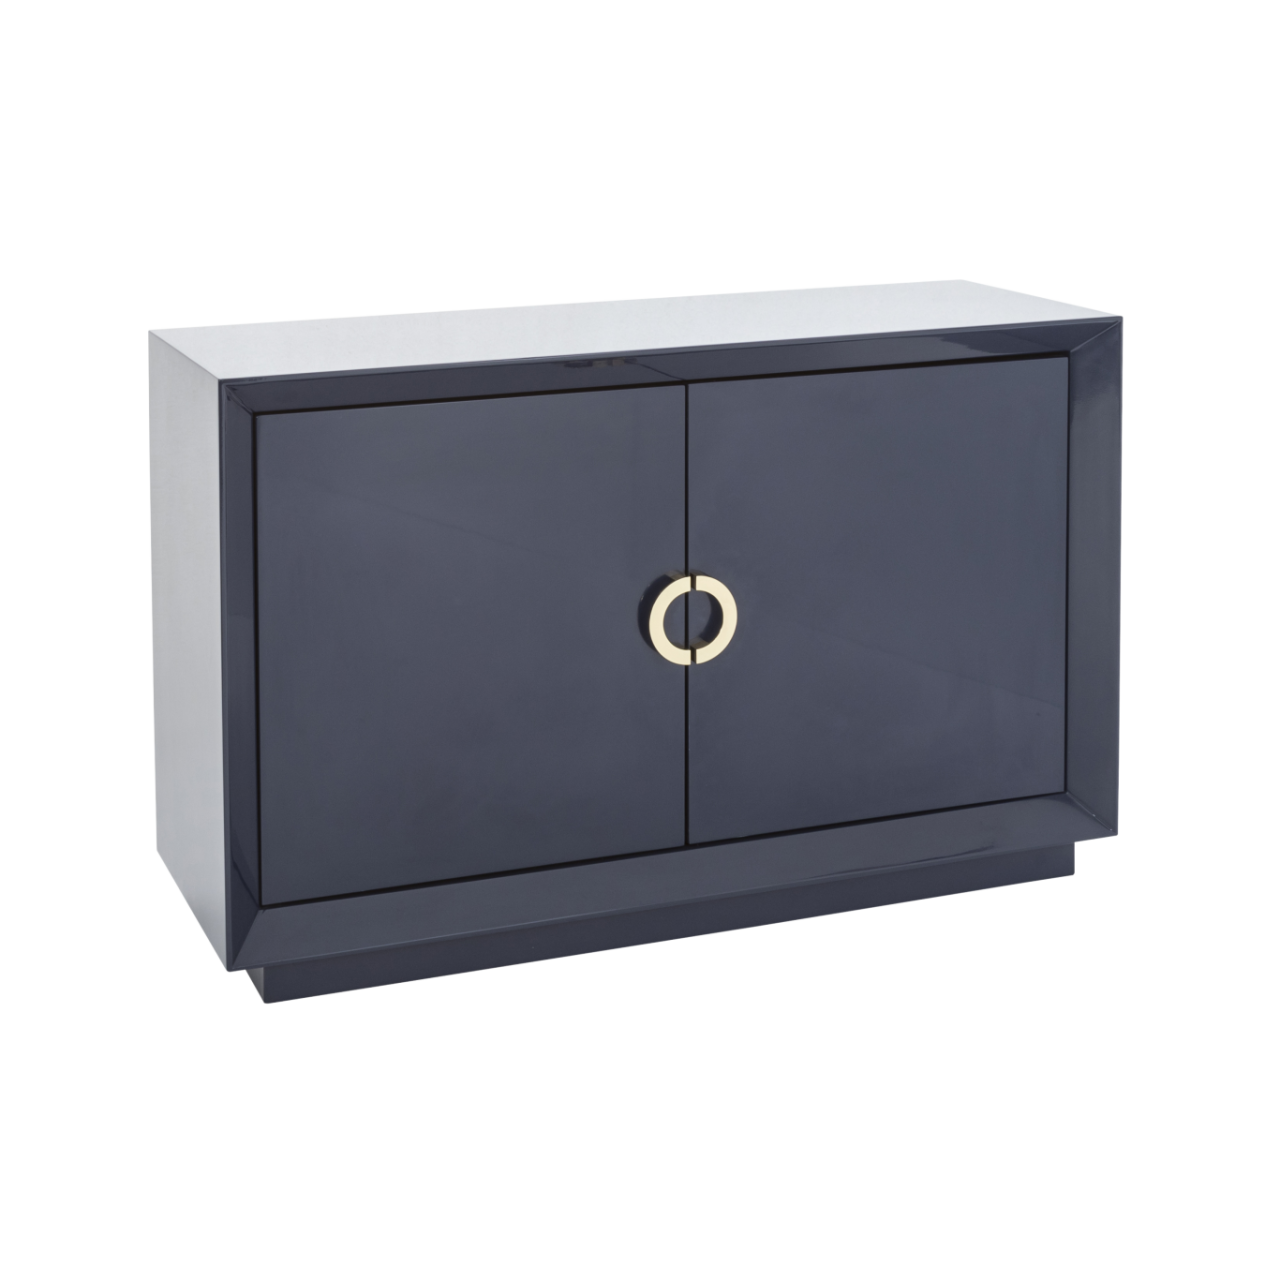 high gloss sideboard in blue with simple semi-circle gold handles